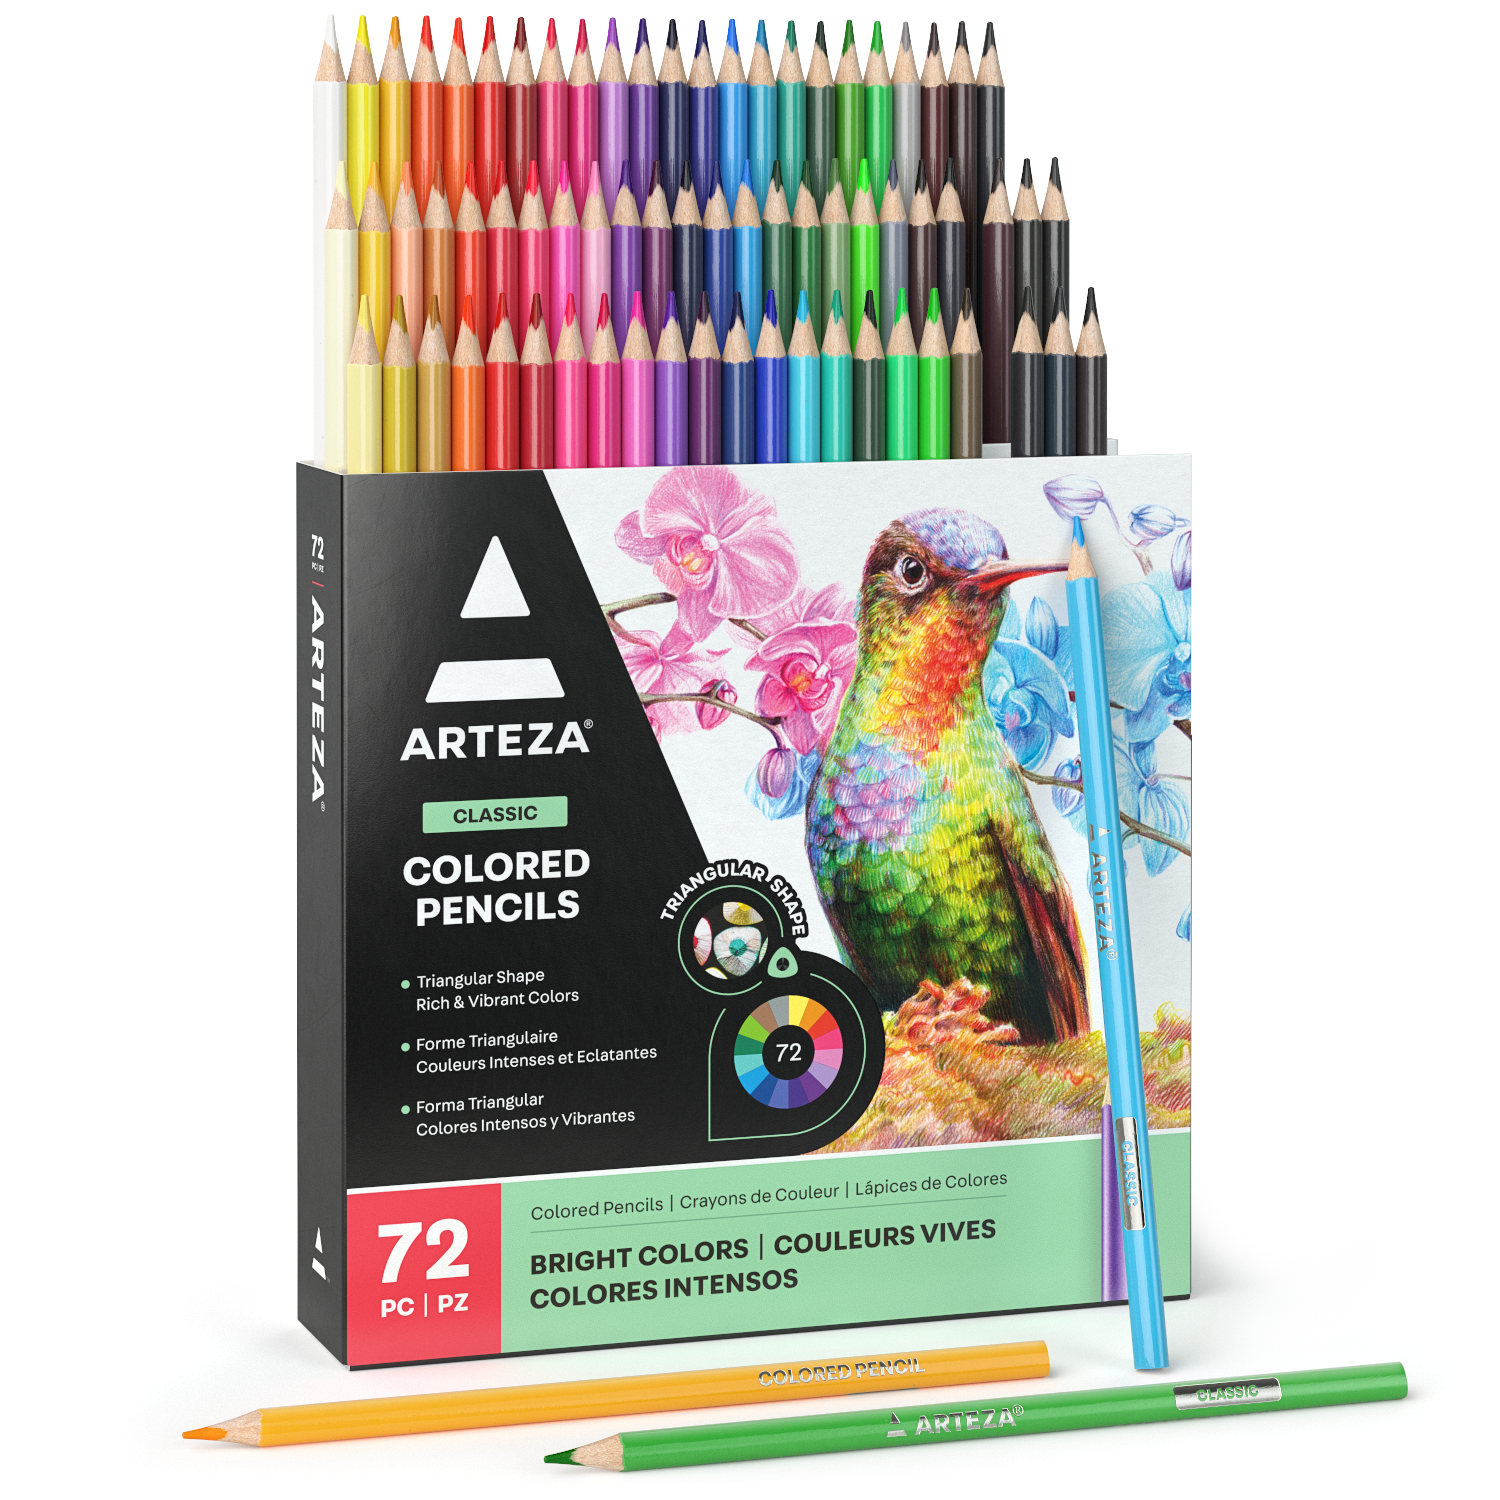 Arteza Expert 72 Colored Pencils Swatch Template DIY Single Page Color  Swatch Printable Digital PDF Template Instant Download 